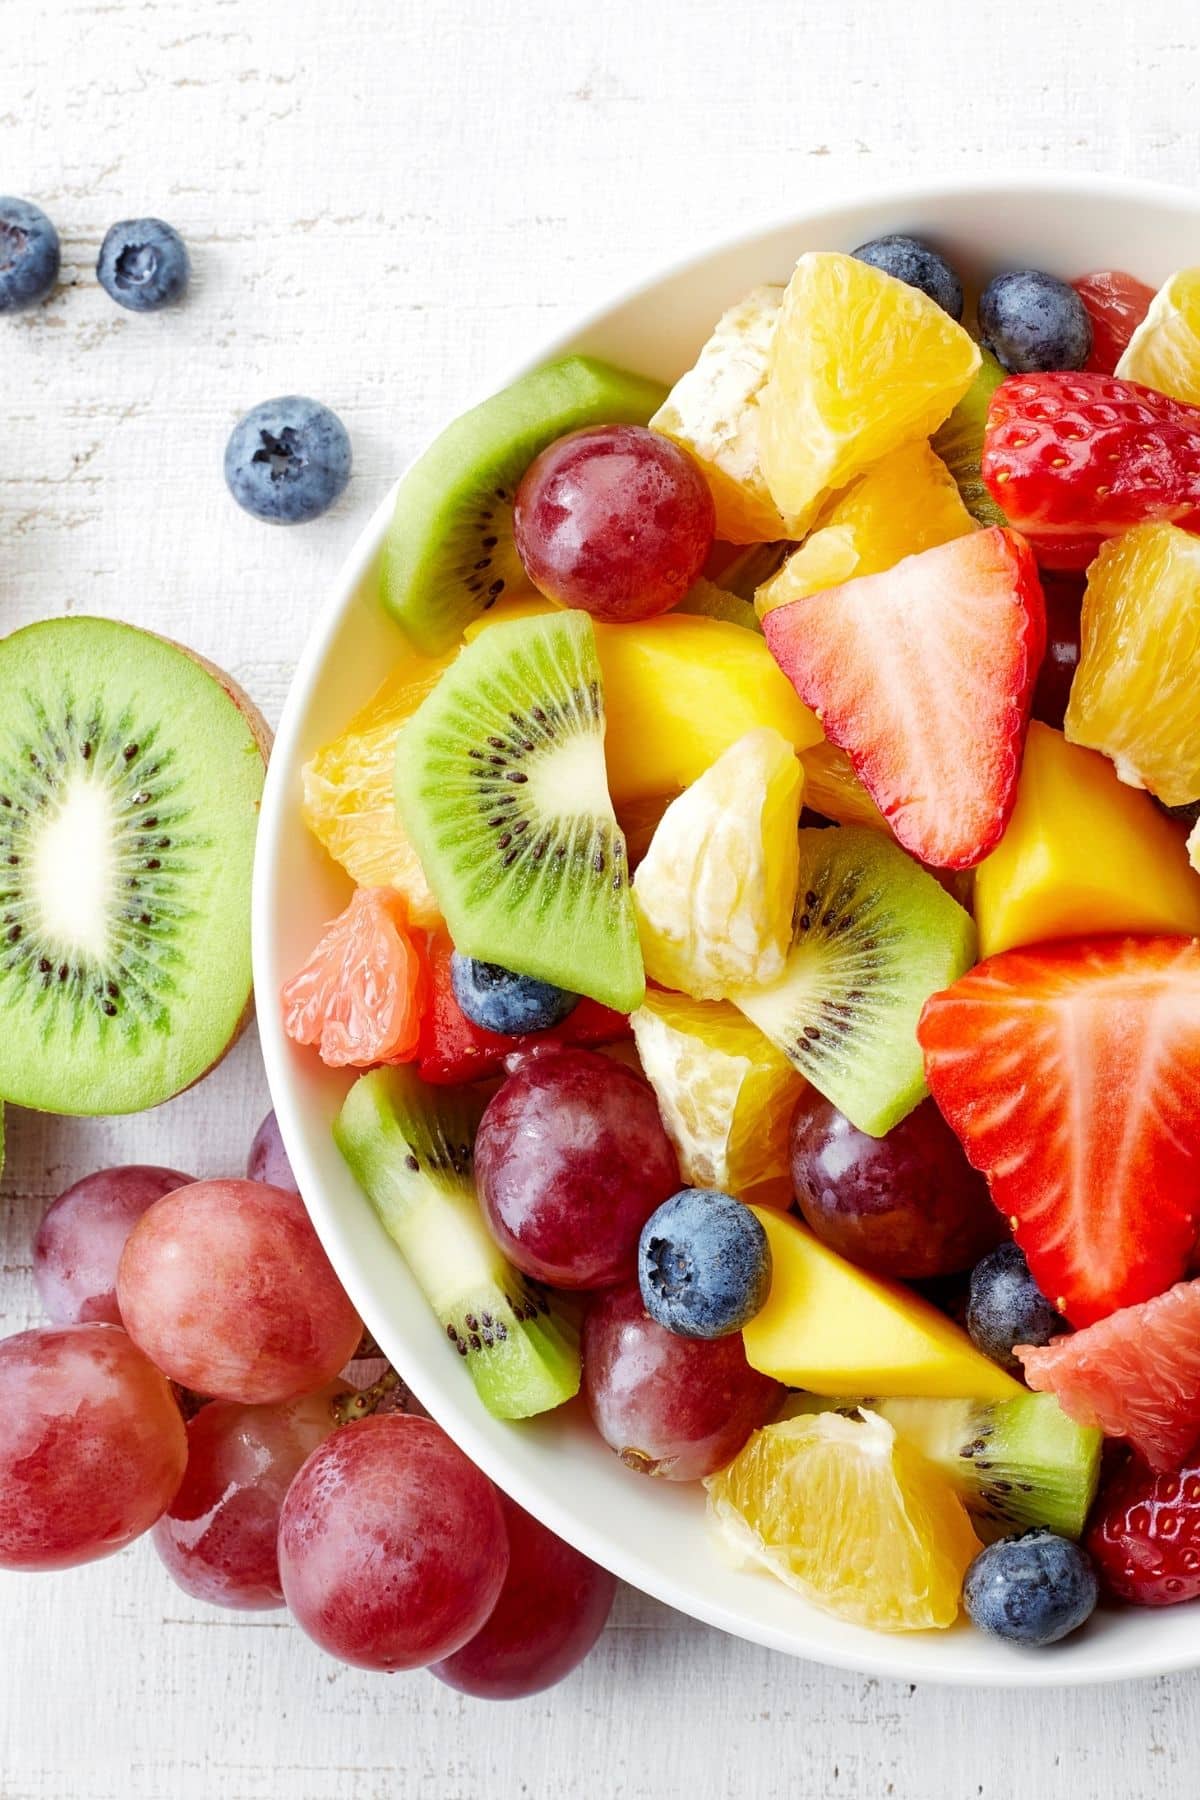 French fruit in a bowl: kiwis, strawberries and grapes.